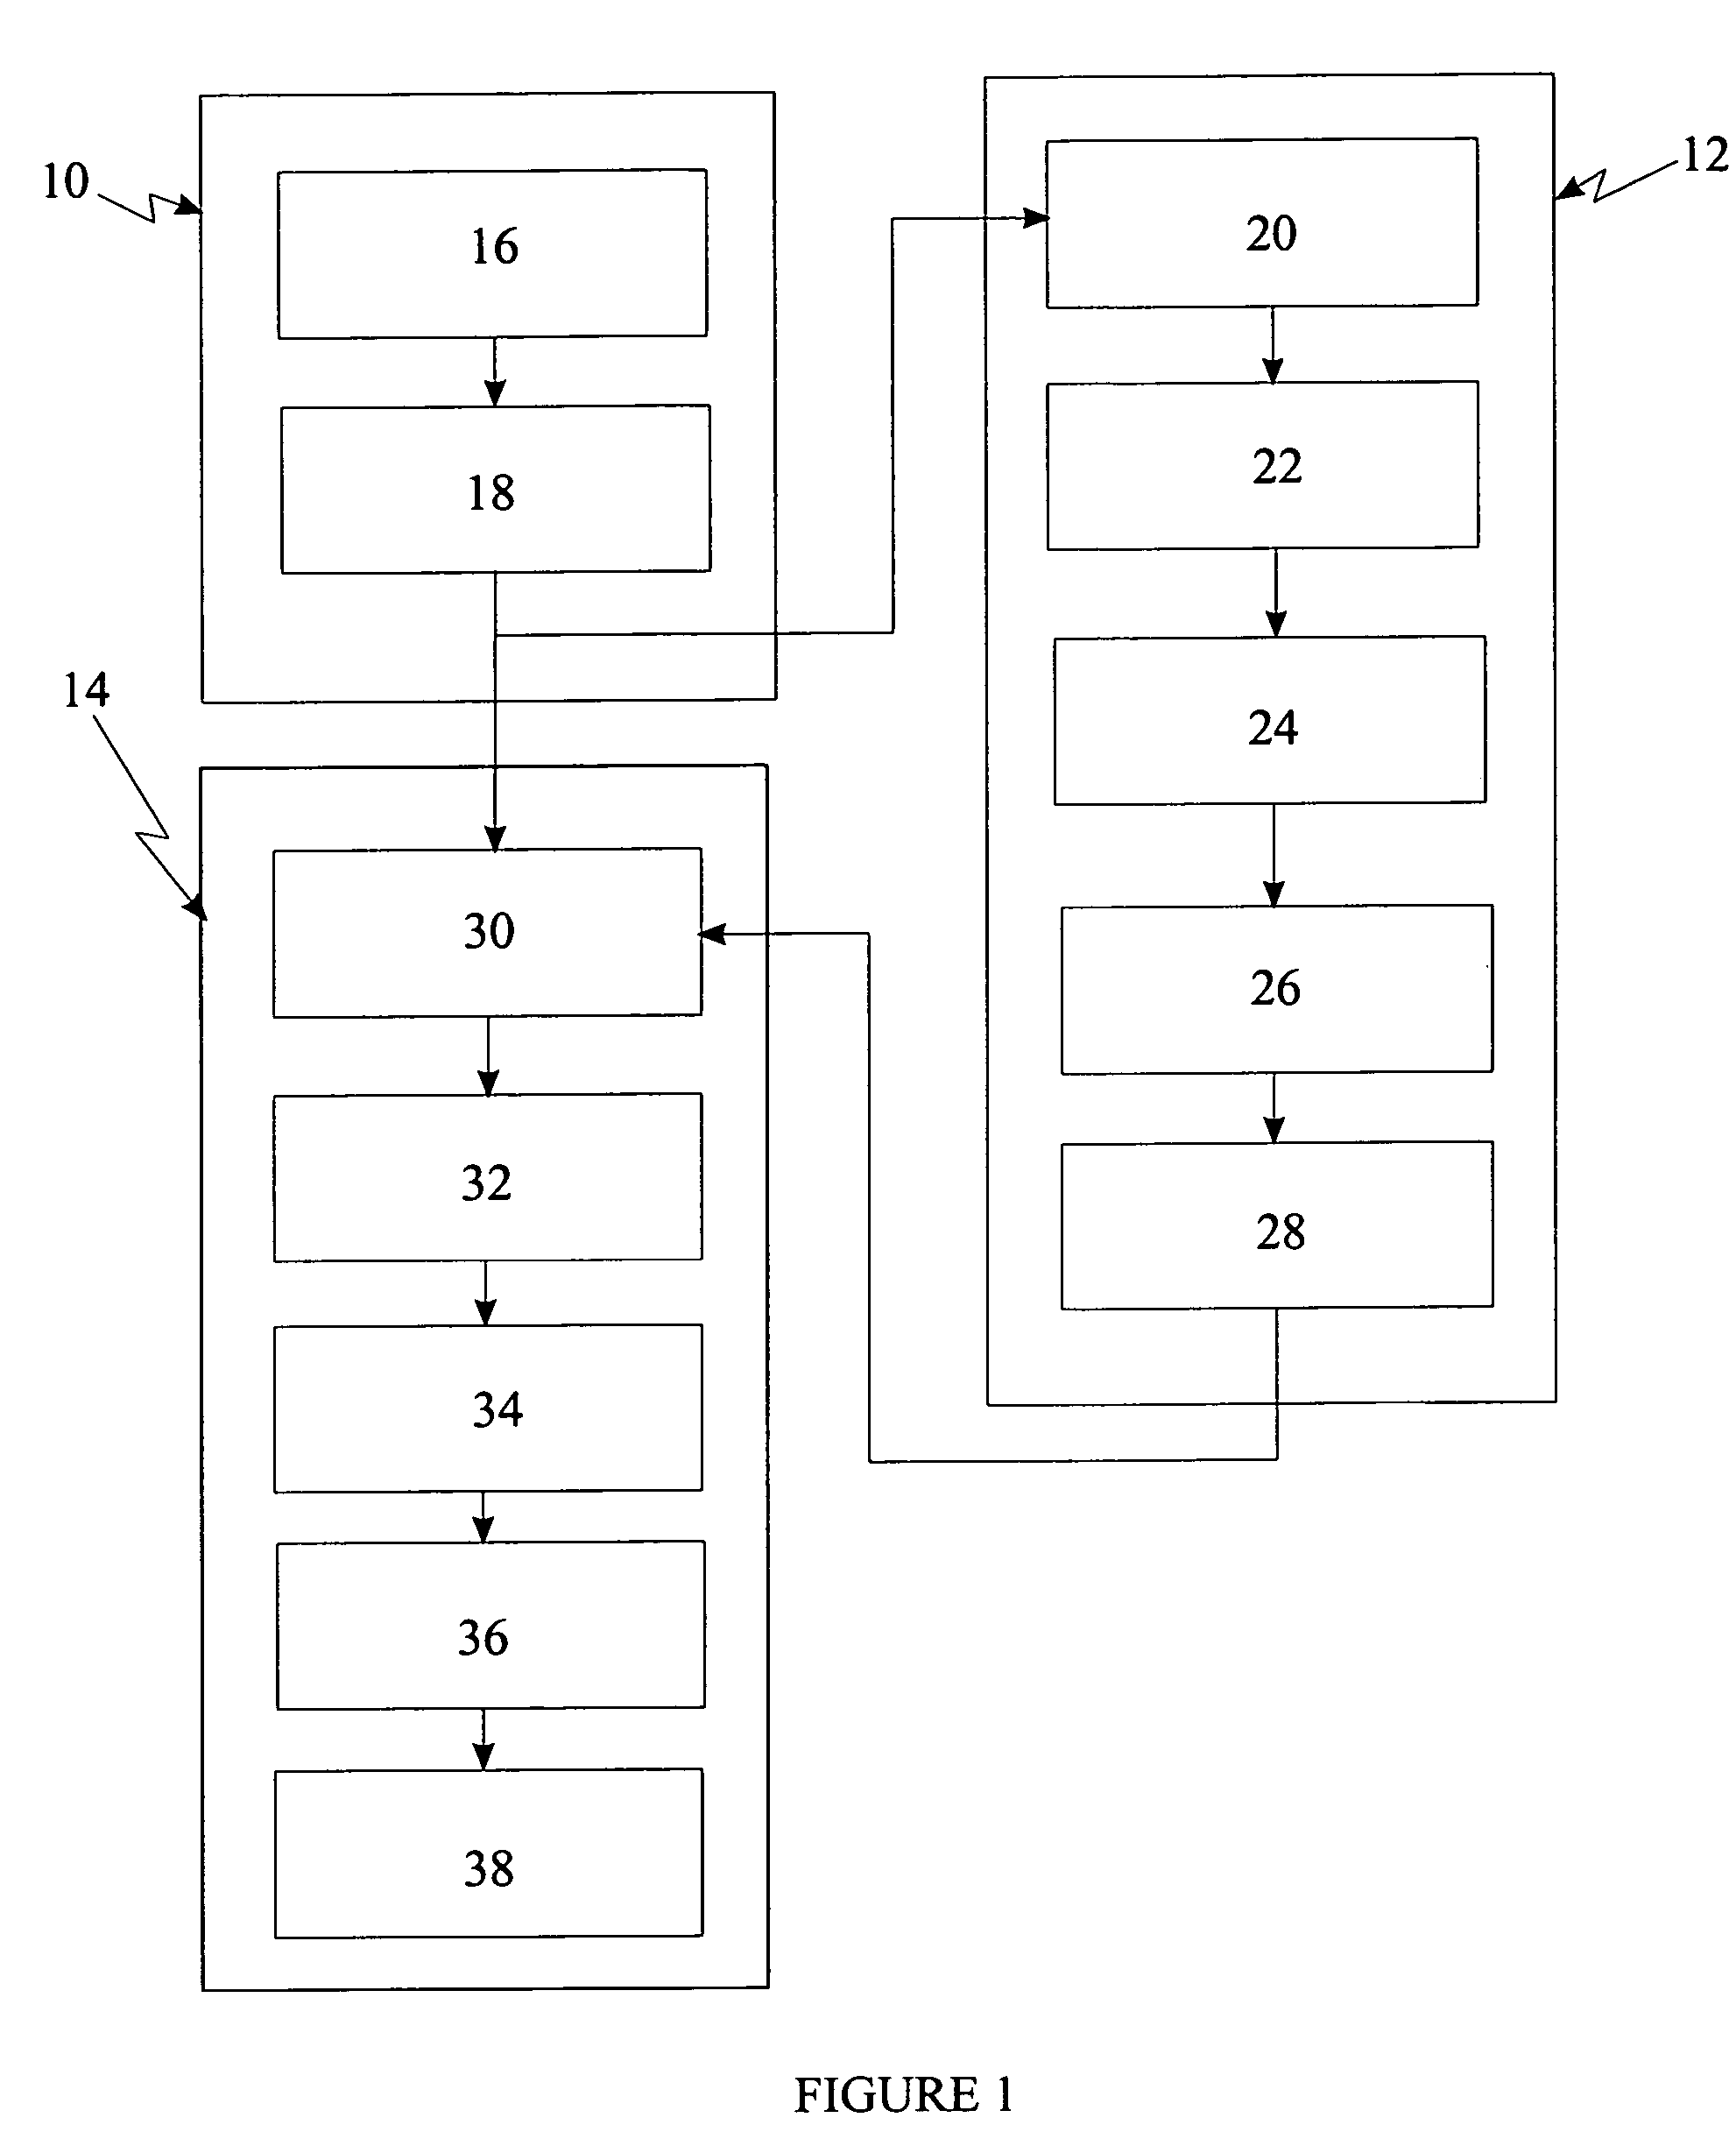 Authentication system executing an elliptic curve digital signature cryptographic process